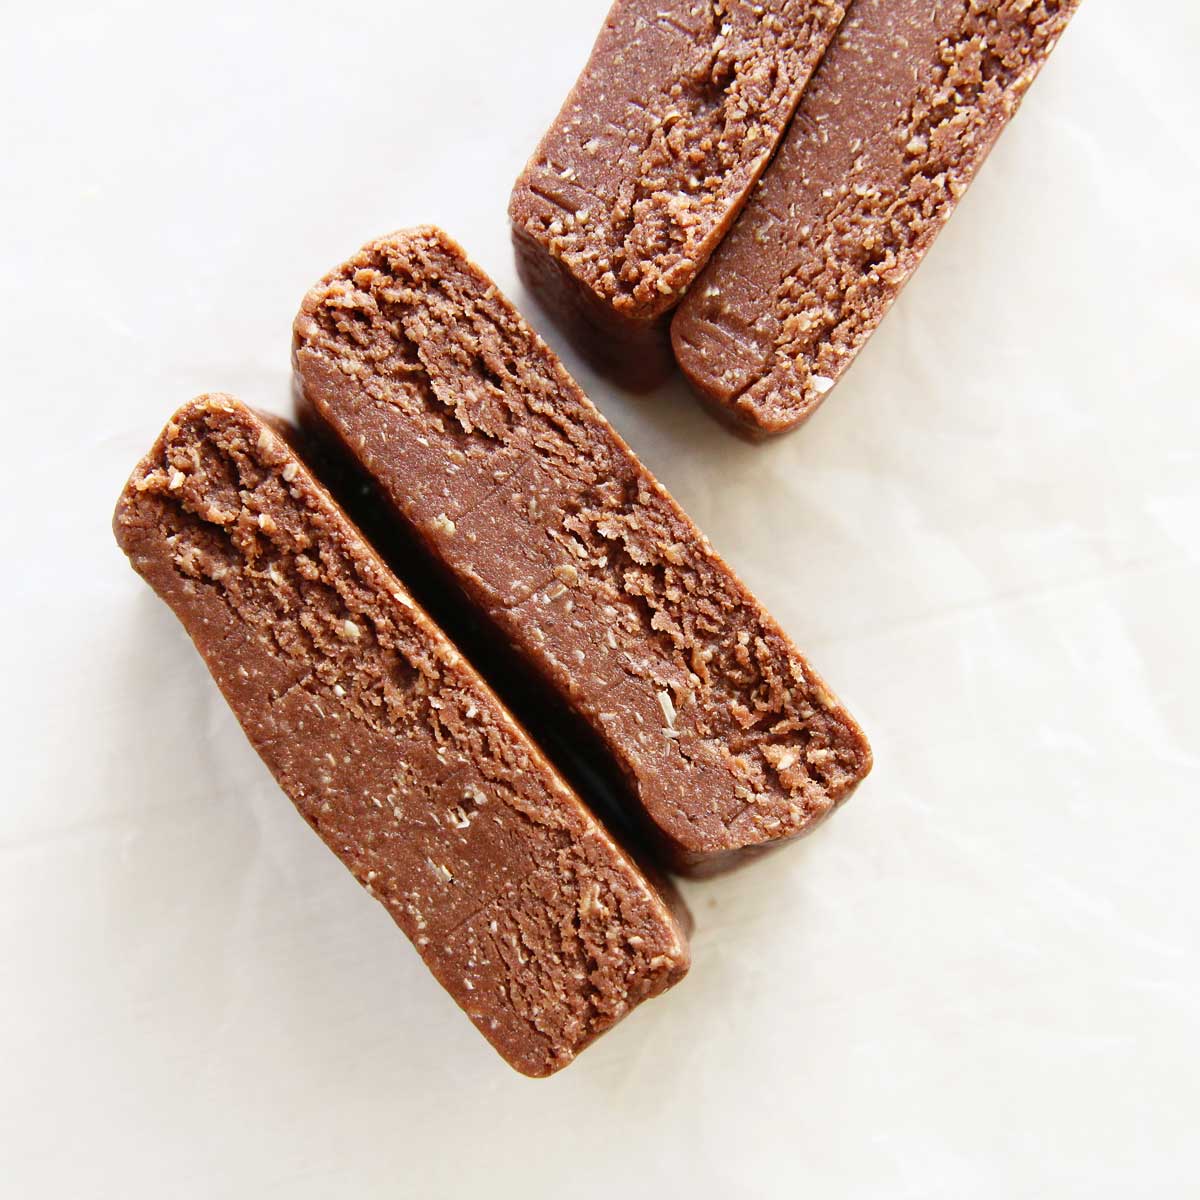 10-Minute Chocolate Peanut Butter Oatmeal Protein Bars - PB Fit Nice Cream